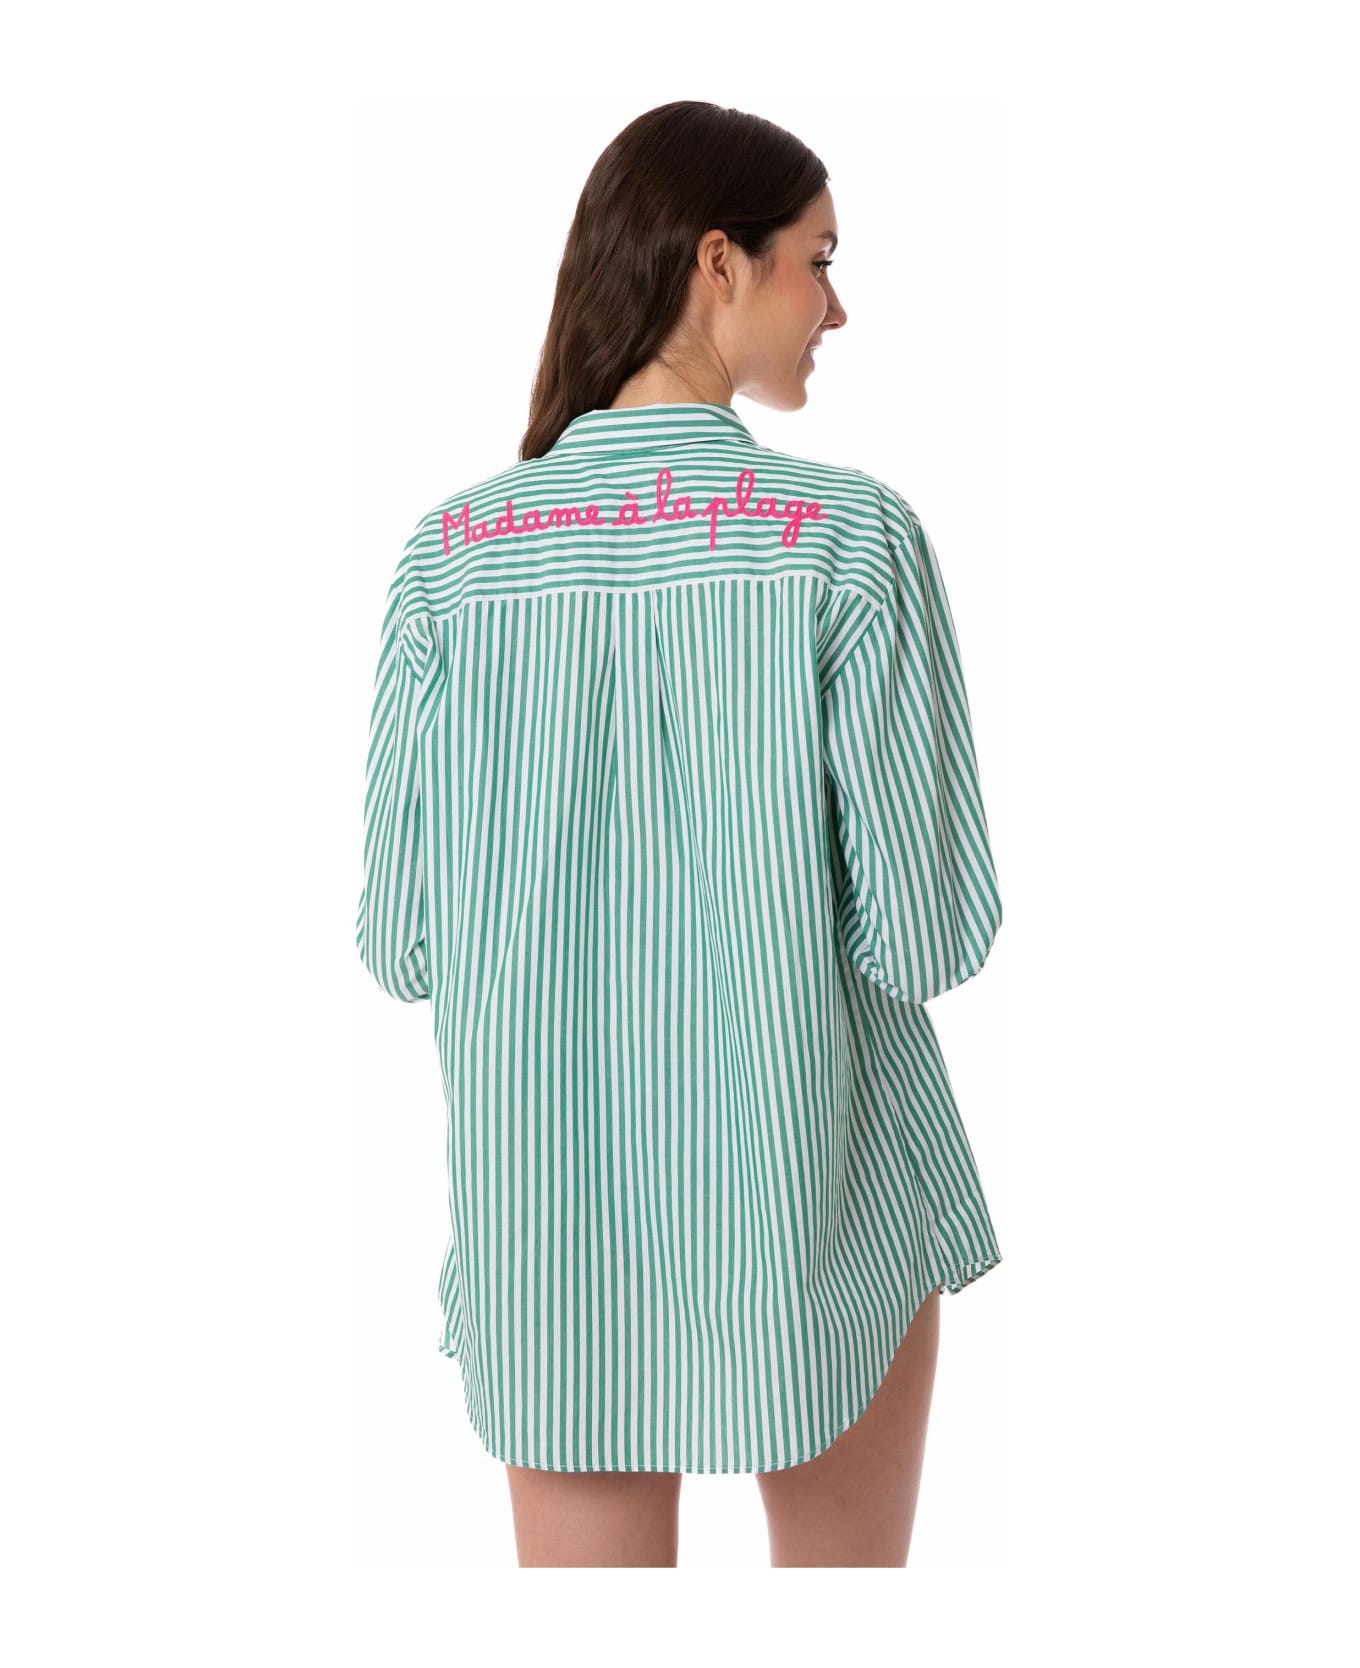 MC2 Saint Barth Green Striped Cotton Shirt With Embroidery - GREEN